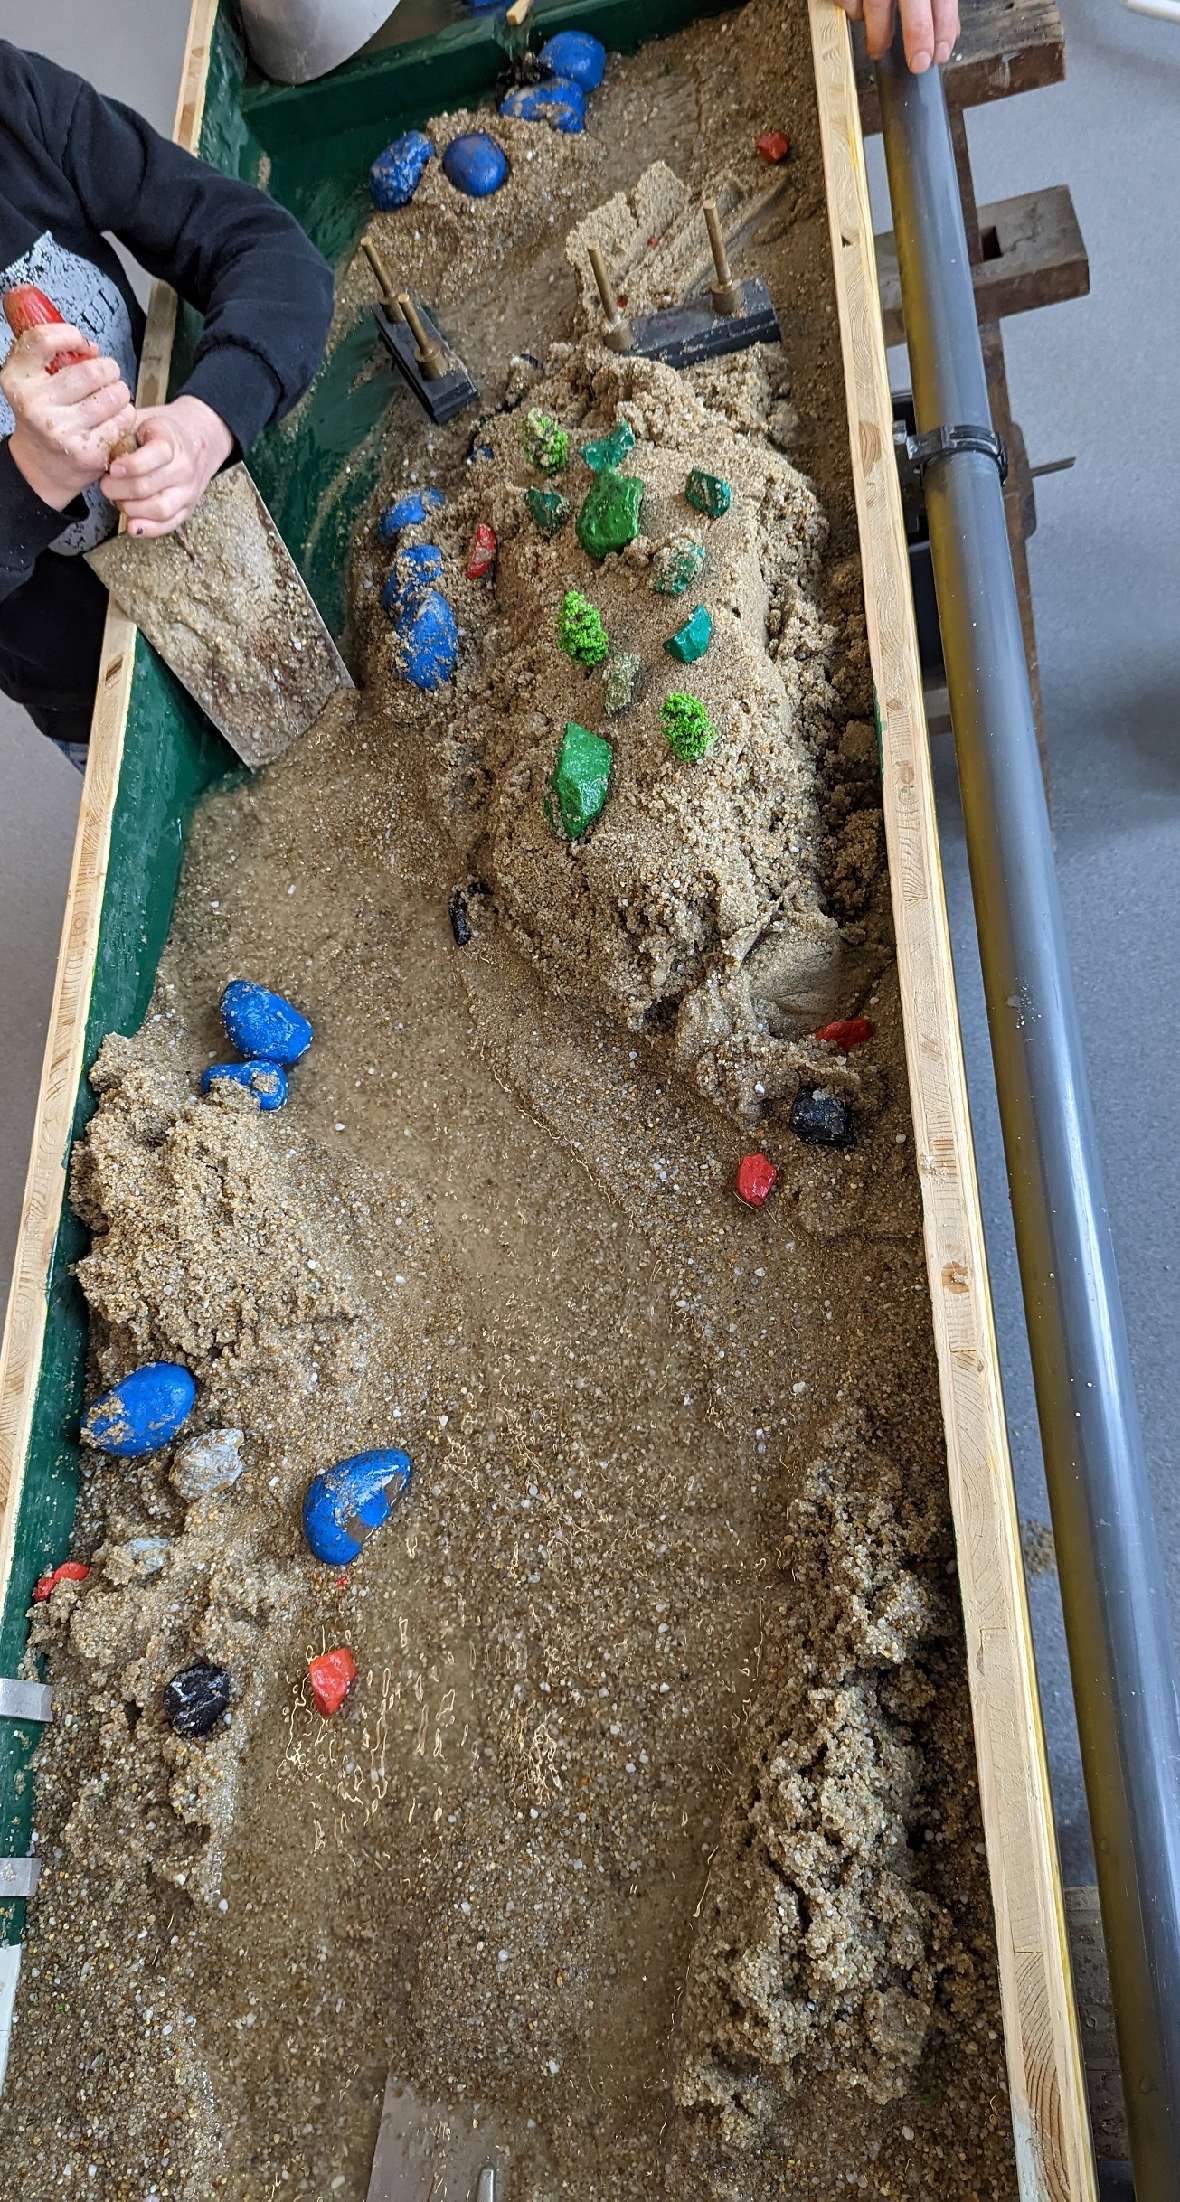 An approximately sixty by two hundred centimetre wooden box is set up inclined and filled with sand. Water runs into the top and drains down through a natural channel in the sand. The water flow can be influenced with coloured stones and small wooden sticks. Six different examples of design can be seen on the photos. Natural, branching courses can be seen, as well as straightening and dams. On some of the examples, children can be seen during the channel design.